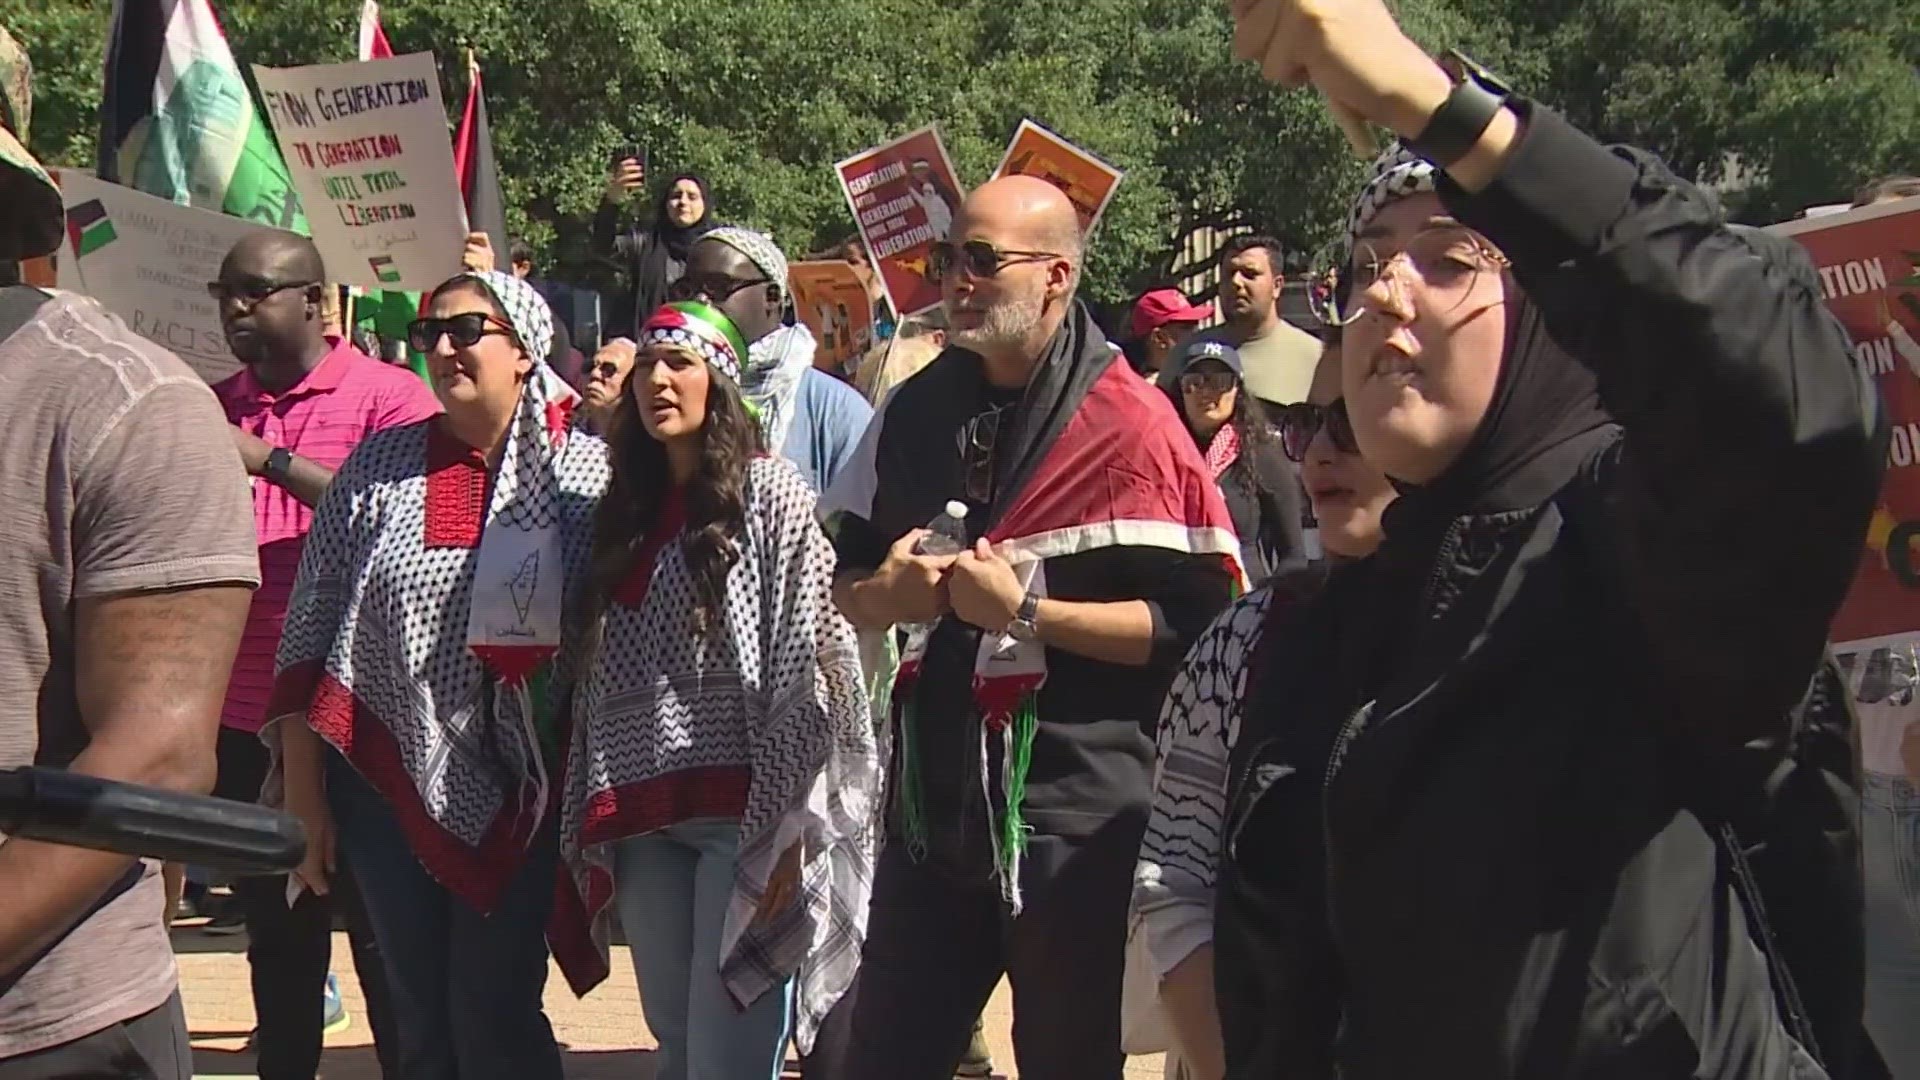 Saturday's (10/14) protest was one of many held across the country as the war in the Middle East rages on.